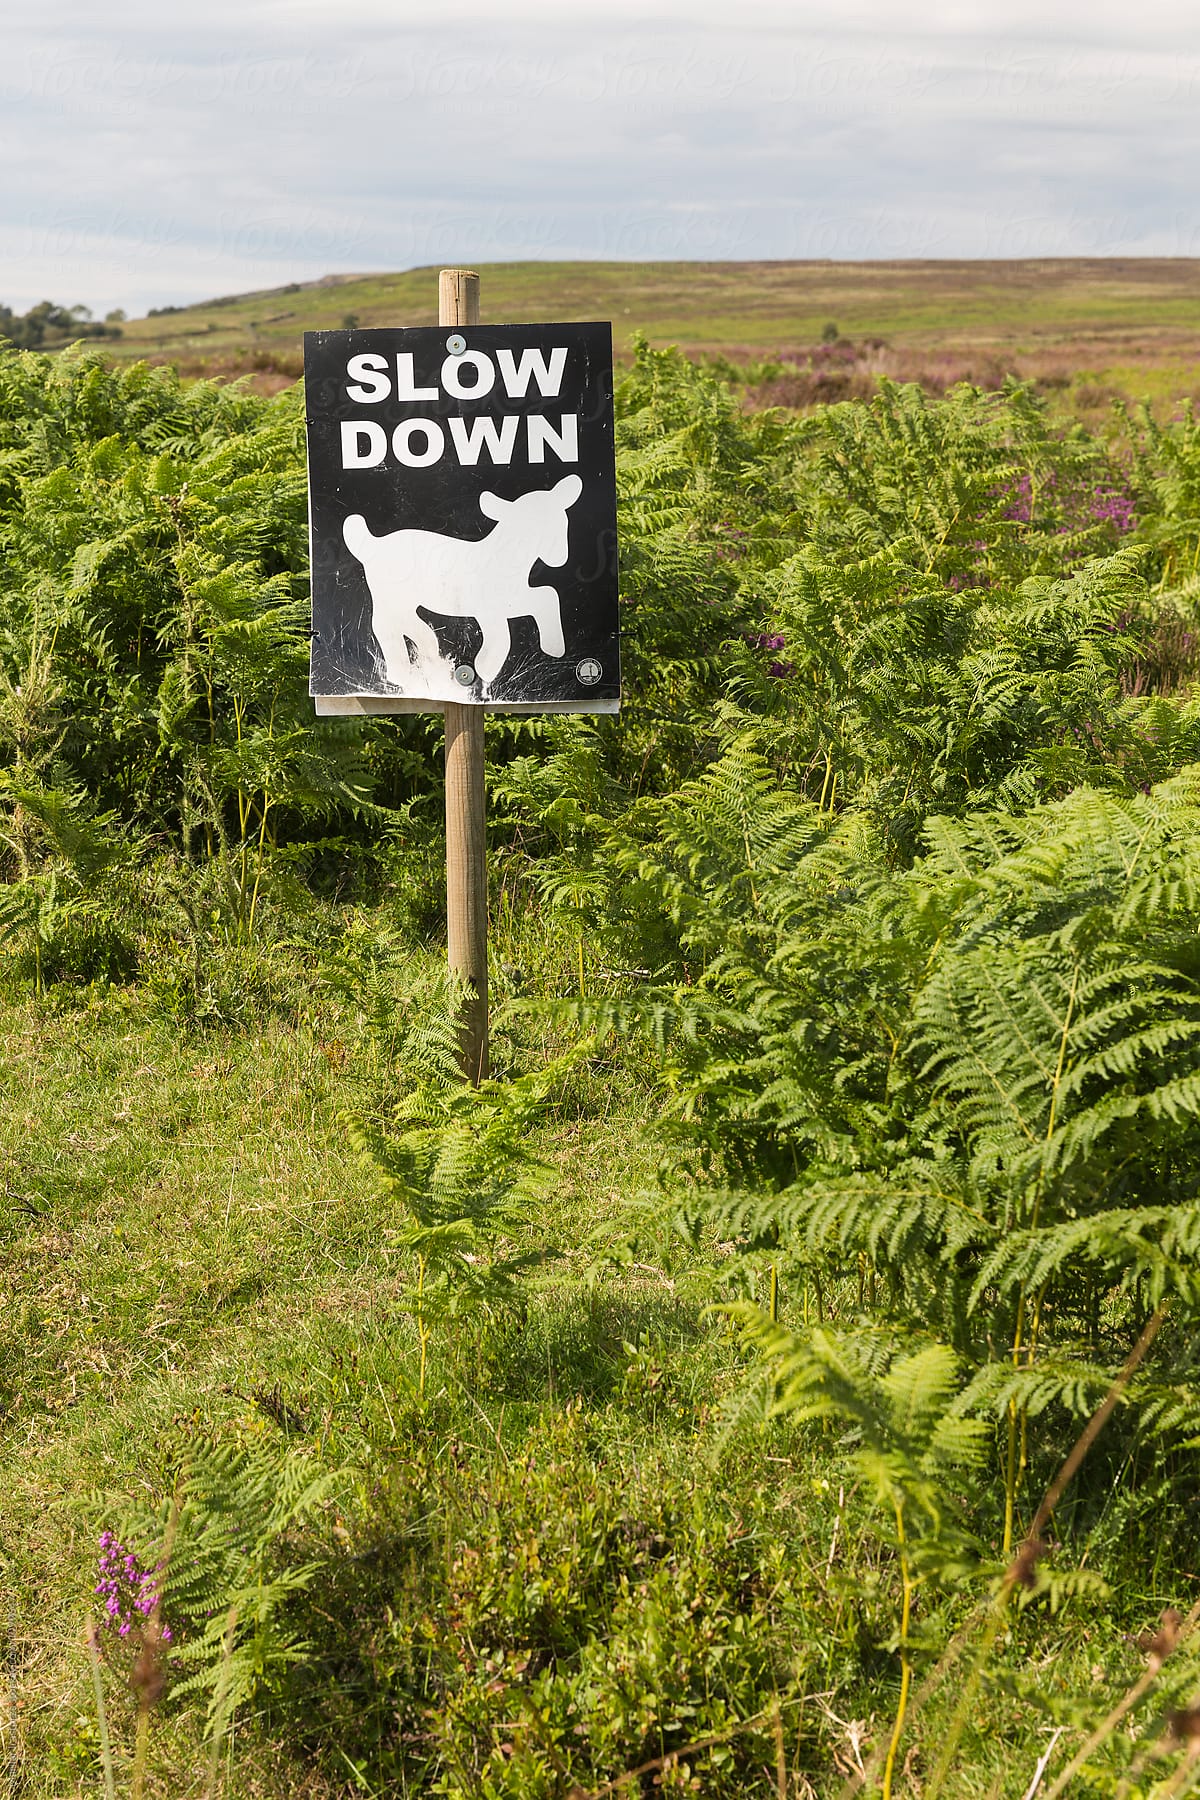 Slow down traffic sign in english countryside